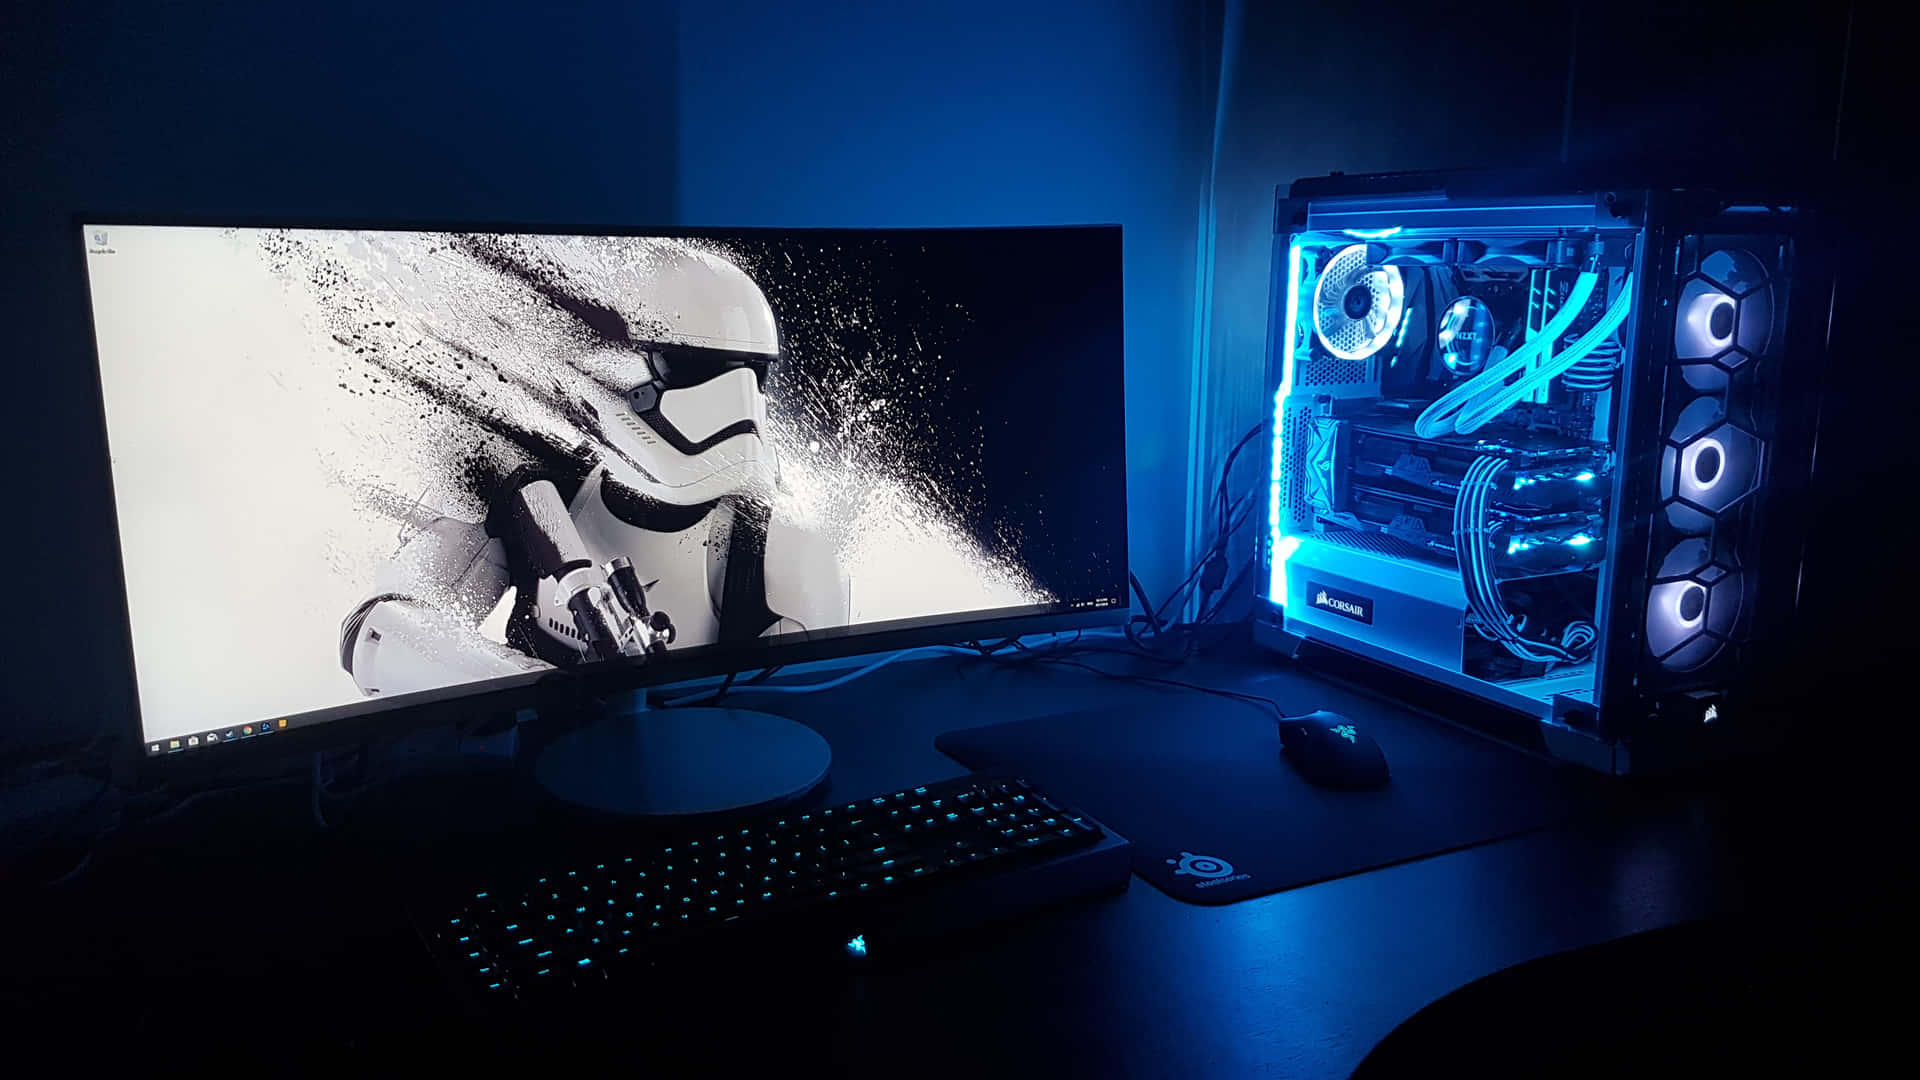 A Computer With A Star Wars Monitor And Keyboard